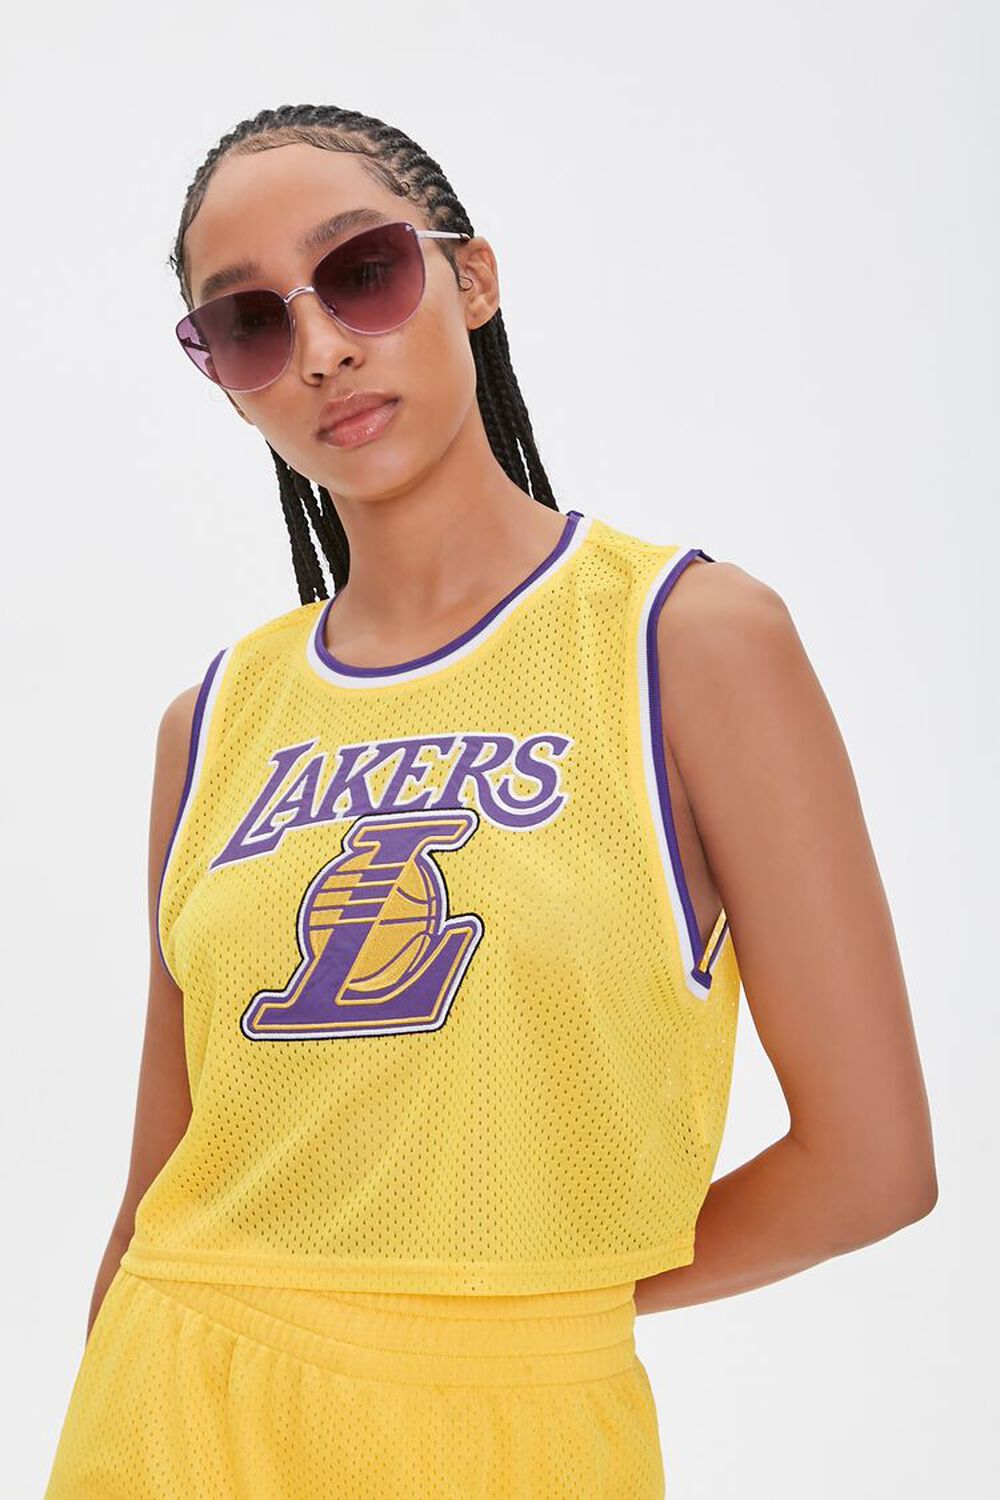 24th Birthday Idea! Lakers Jersey! Forever 21 chunky heels!